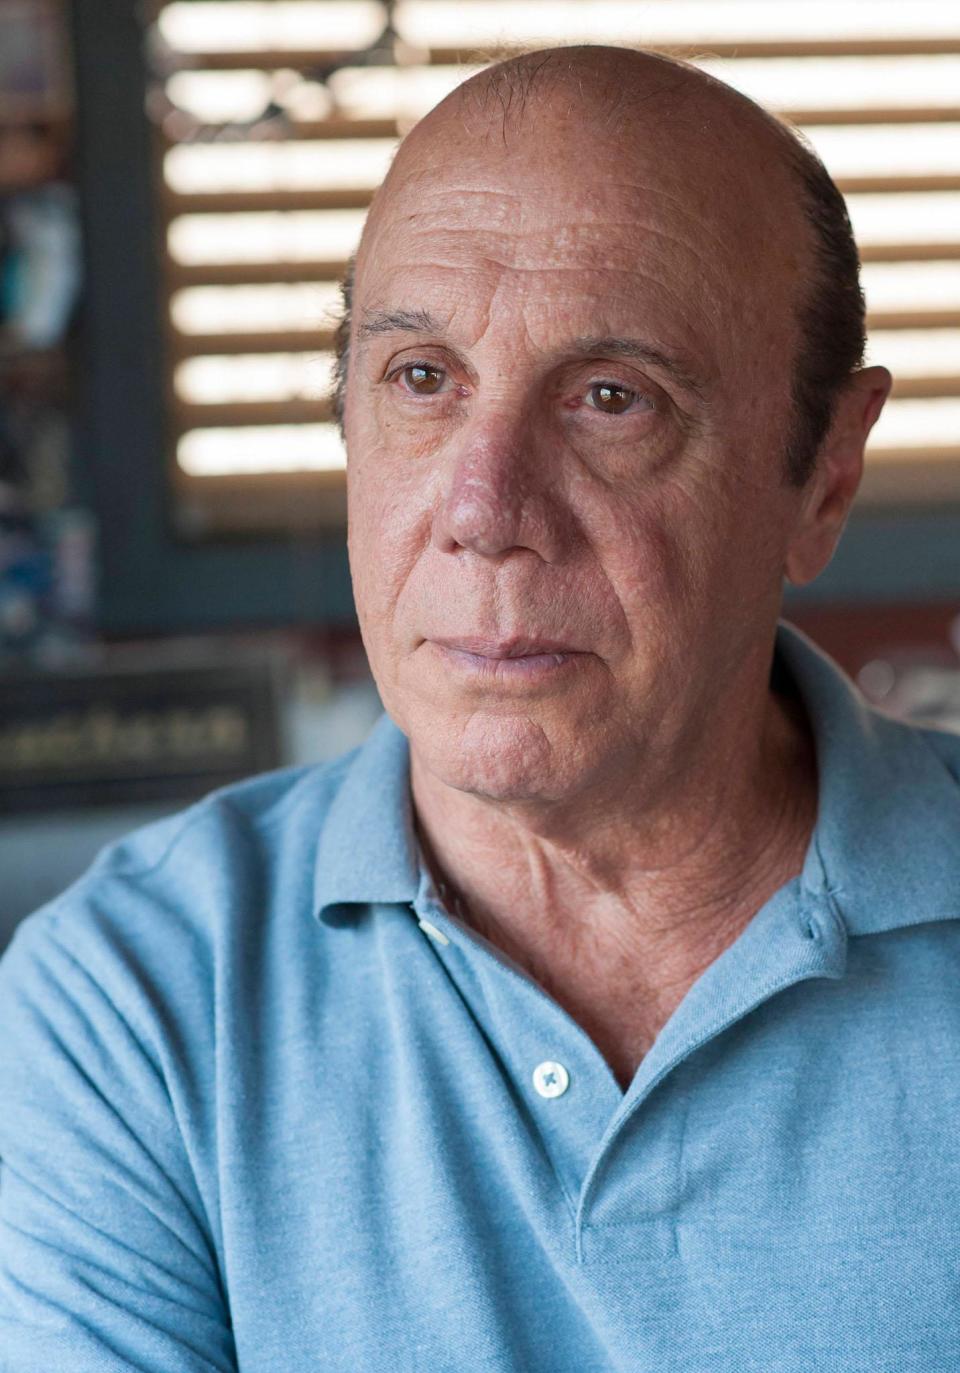 Dayton Callie as Wayne Unser in 'Sons of Anarchy'